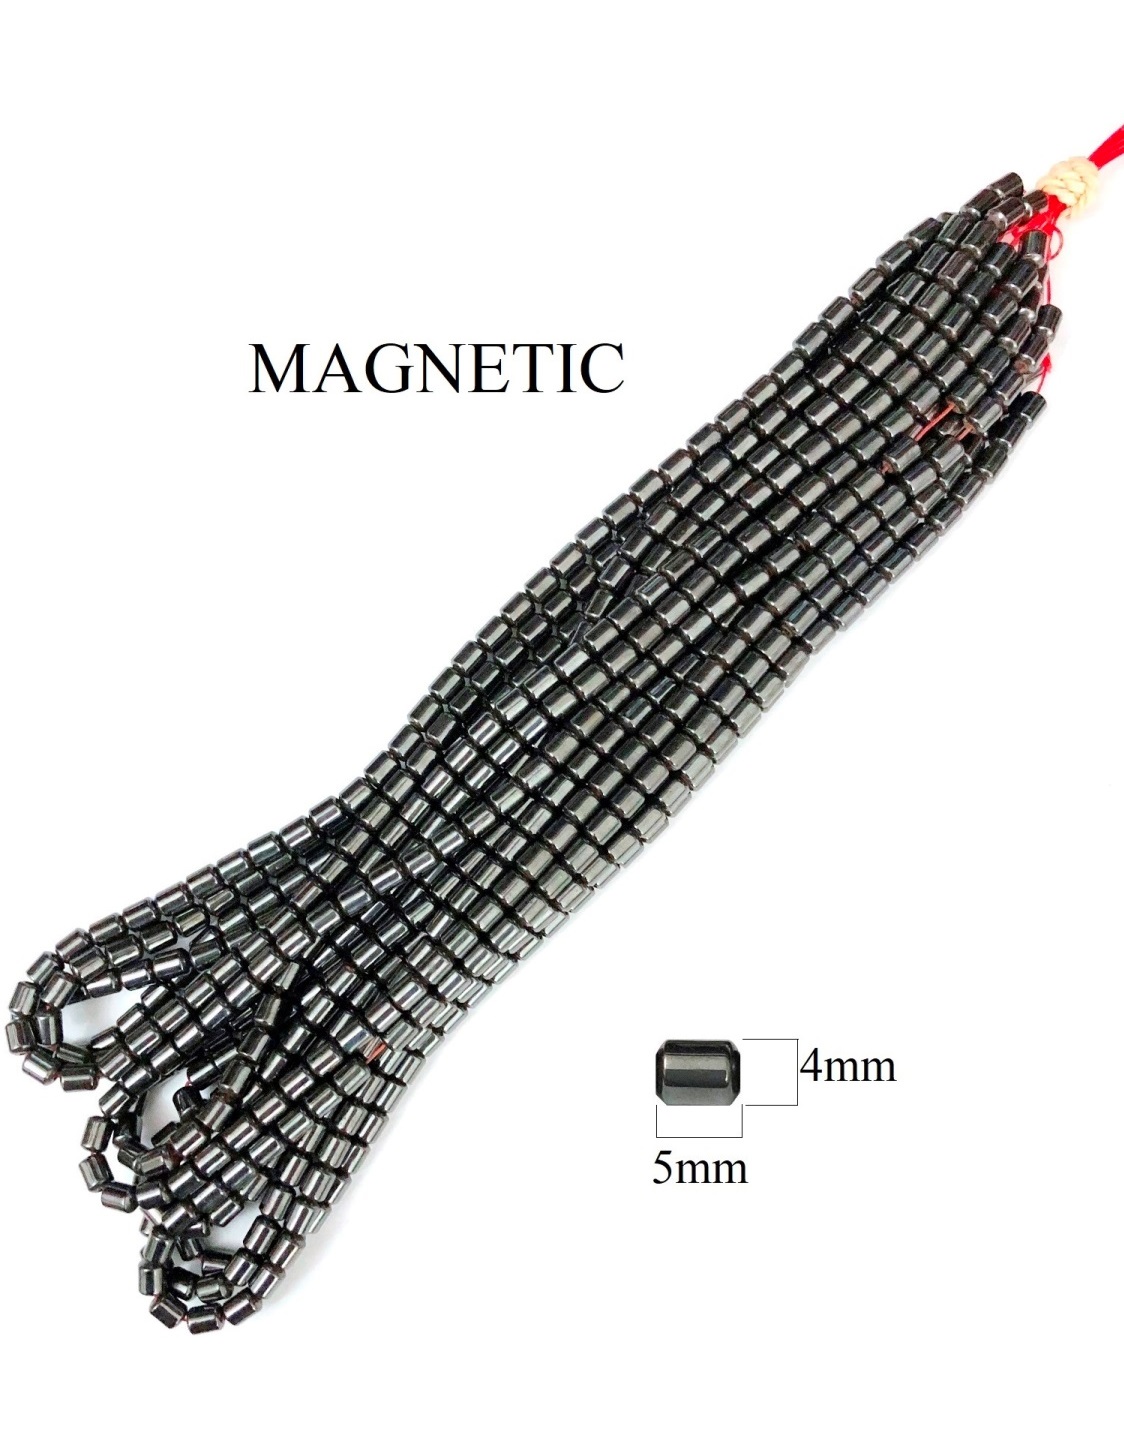 100 Strands 4x5mm Drum Magnetic Hematite Beads # MB-D4x5-100